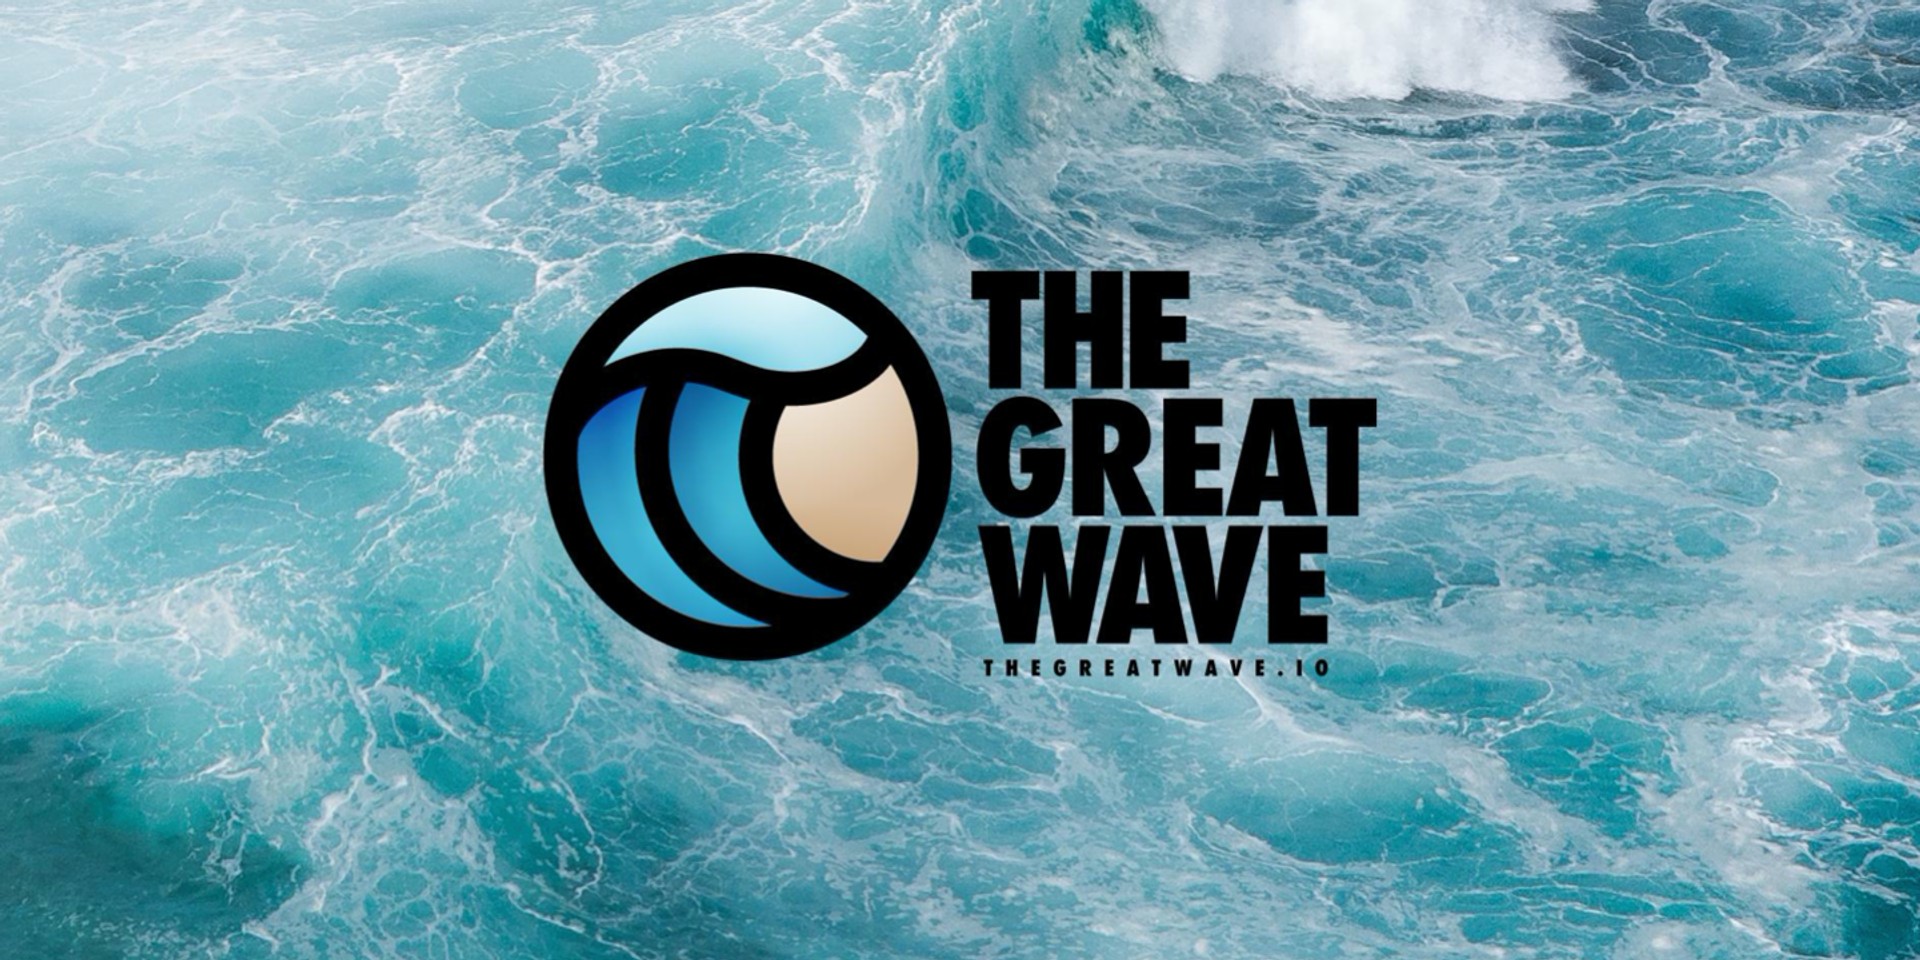 Musicians, visual artists, industry partners and Web3 developers come together to launch new artist collective DAO, 'The Great Wave'